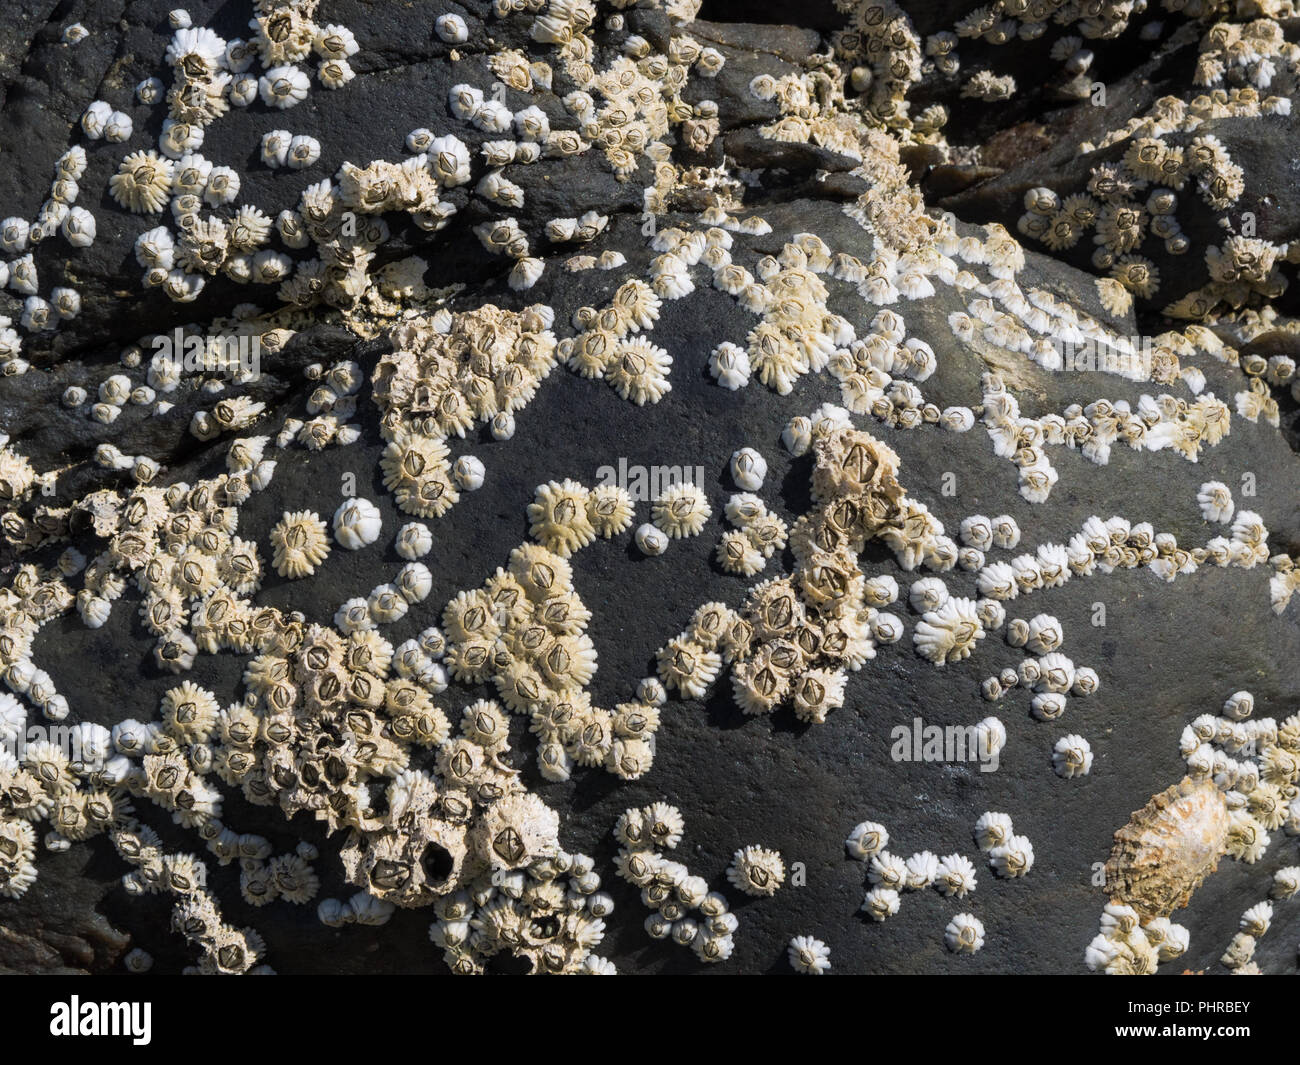 Colony of small mussels (Balanidae) on black rock Stock Photo